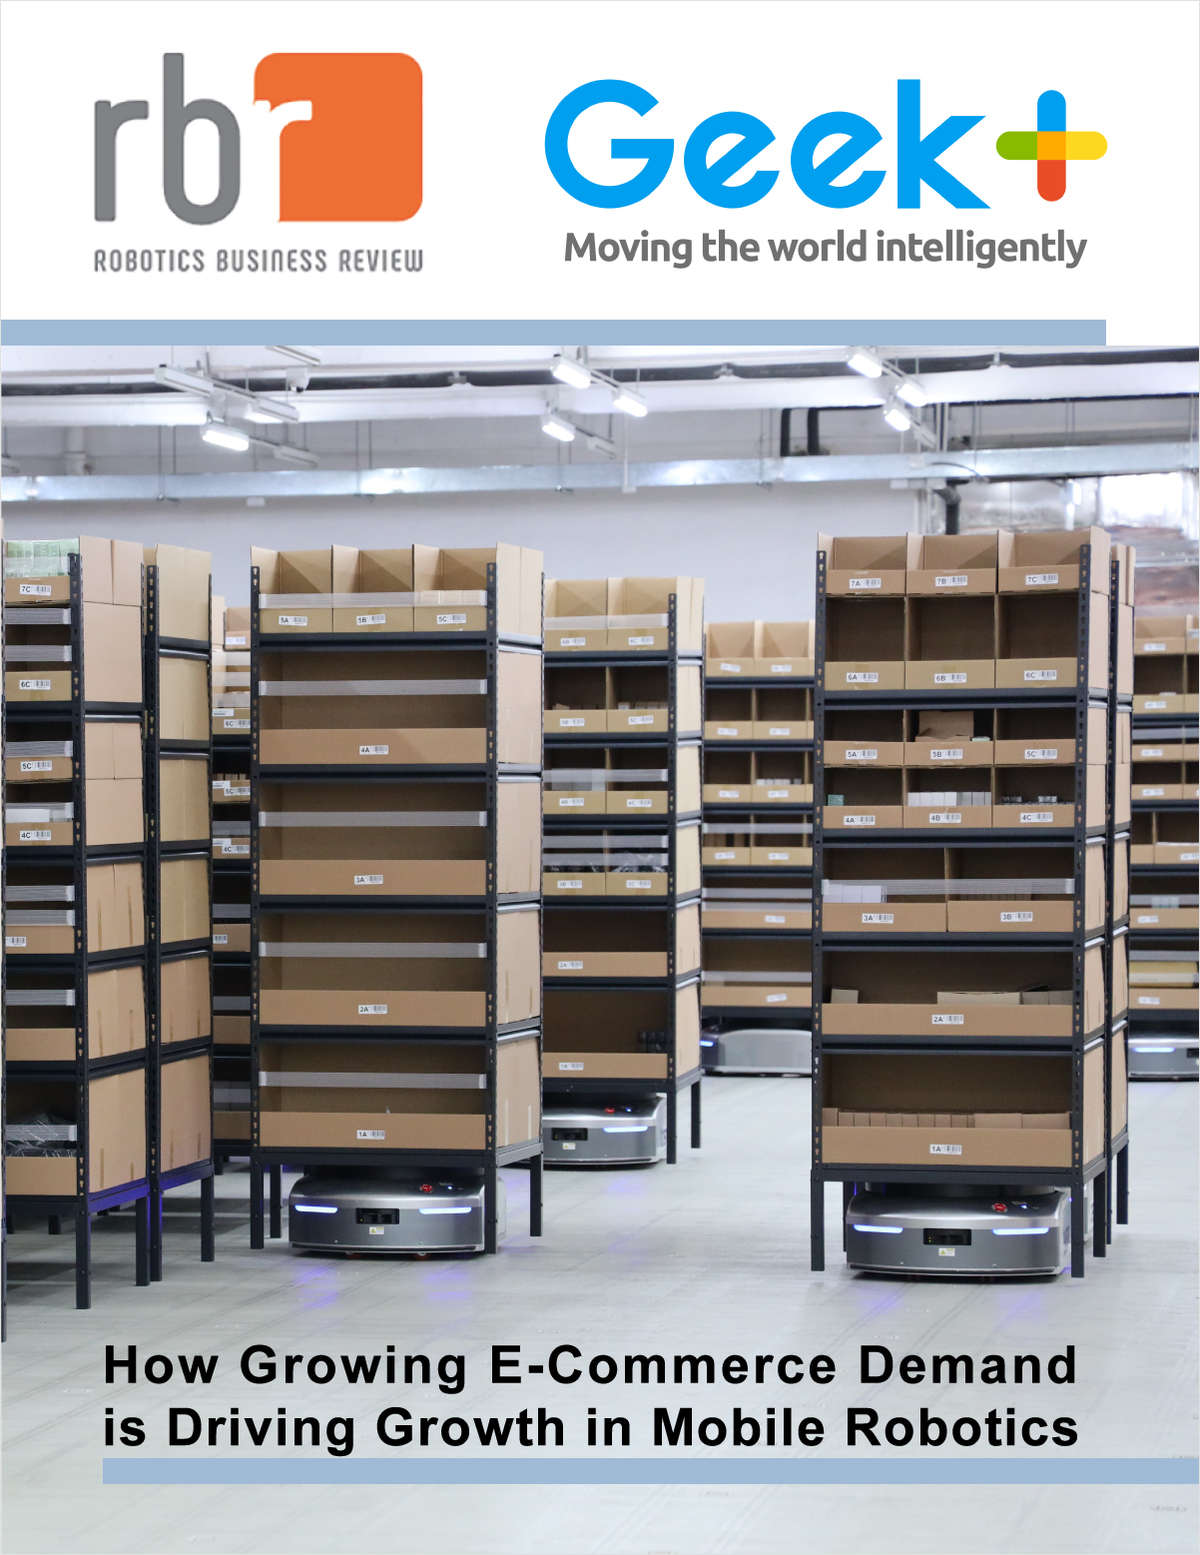 How Growing E-Commerce Demand is Driving Growth in Mobile Robotics